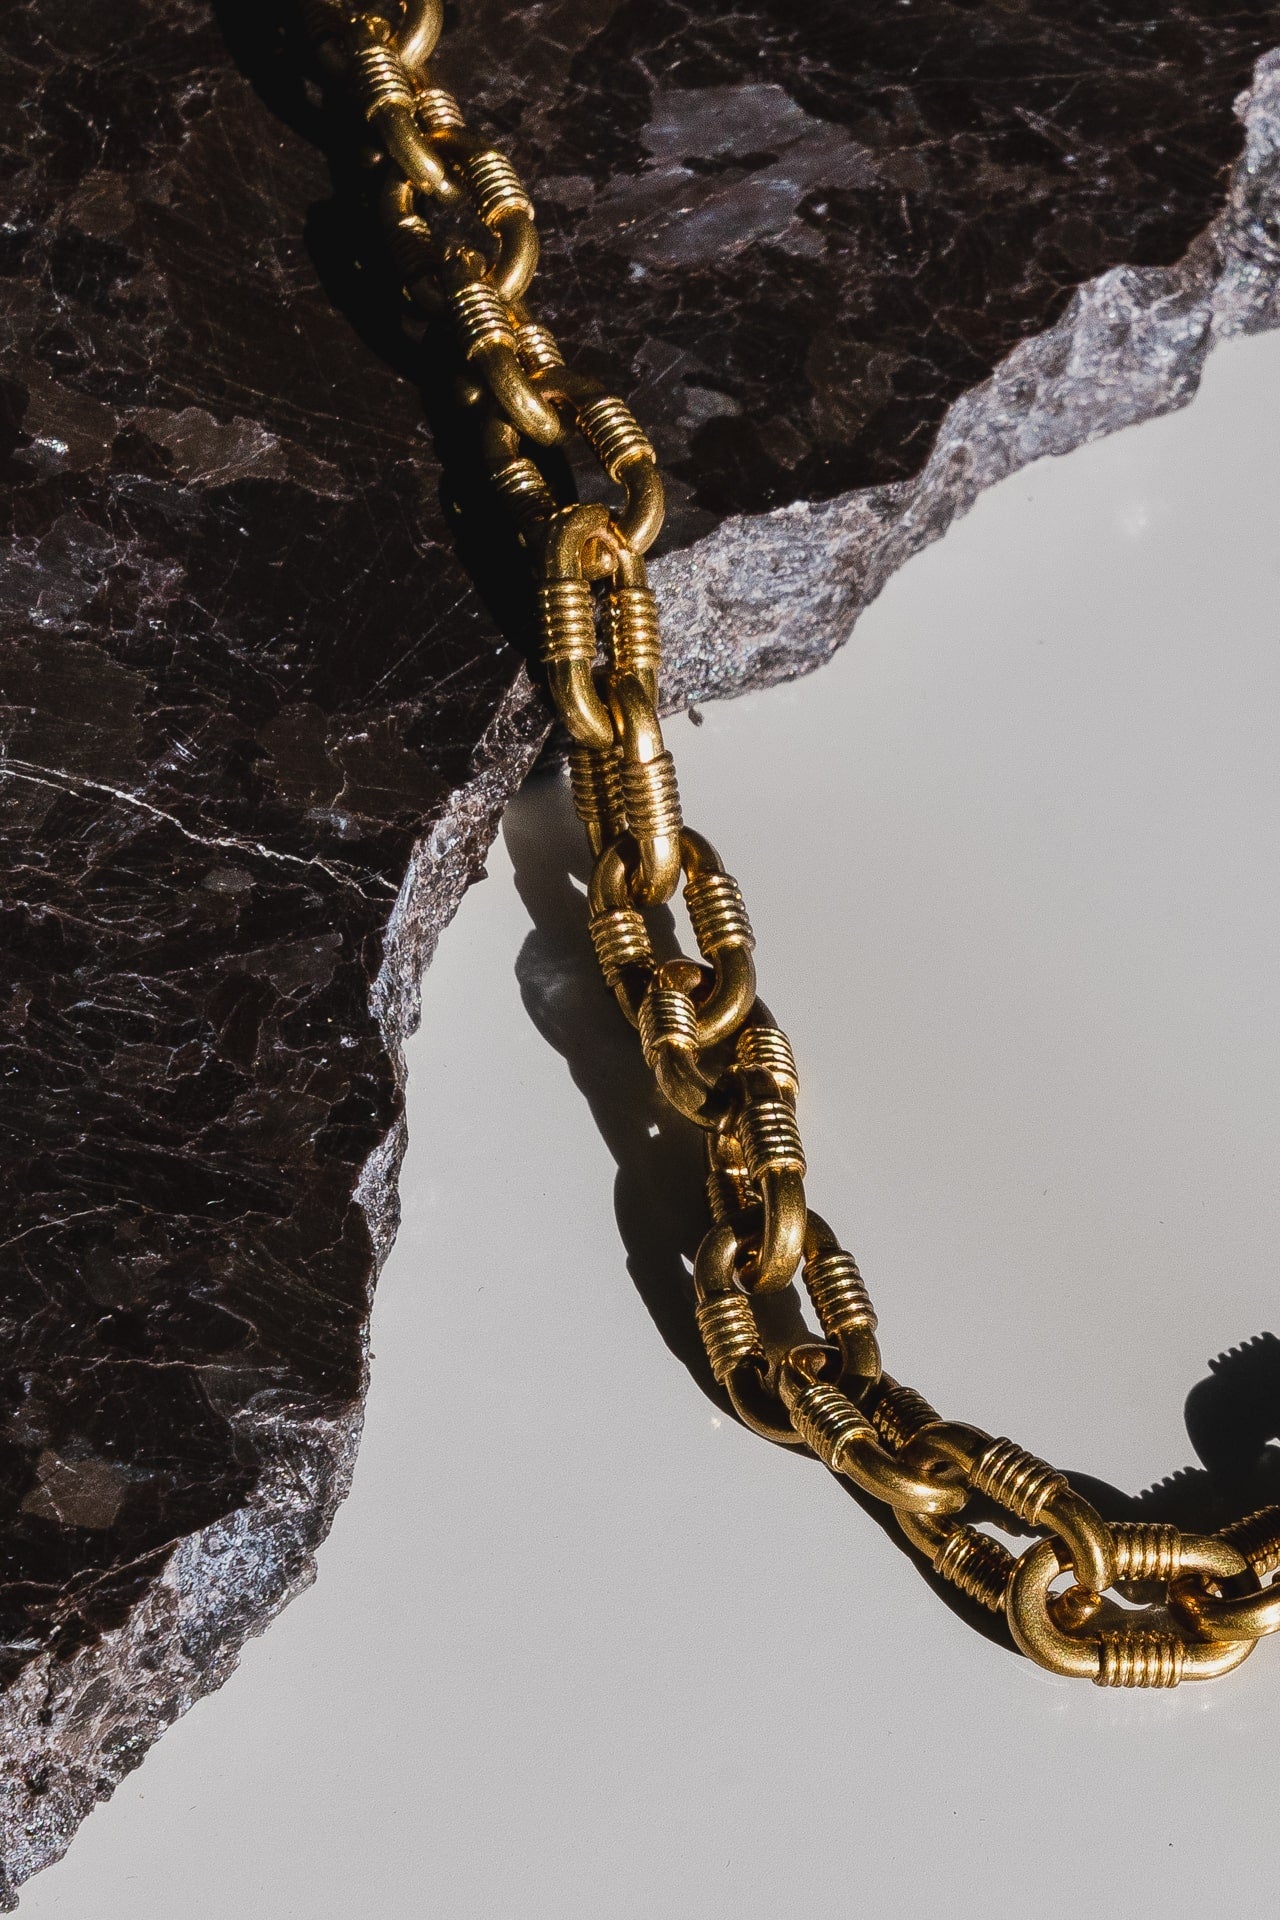 Hyperion Gold Bag Chain